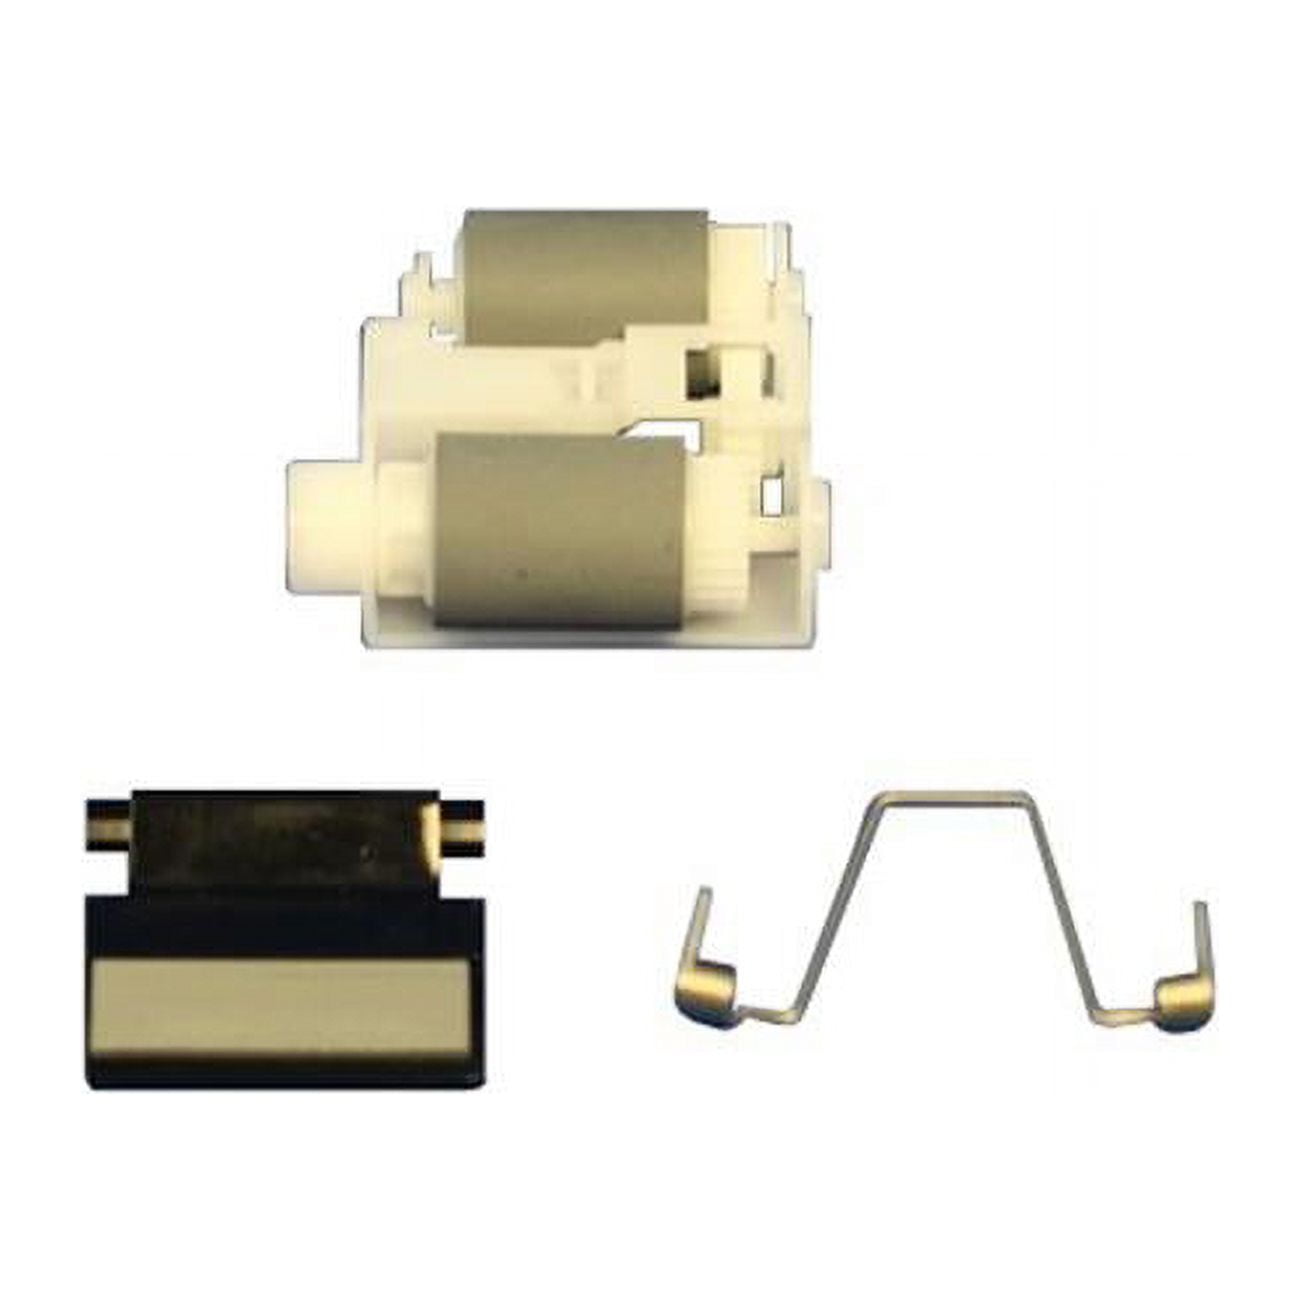 EAN 5711045608971 product image for LY5385001-OEM Bypass Tray Paper Feed Kit | upcitemdb.com